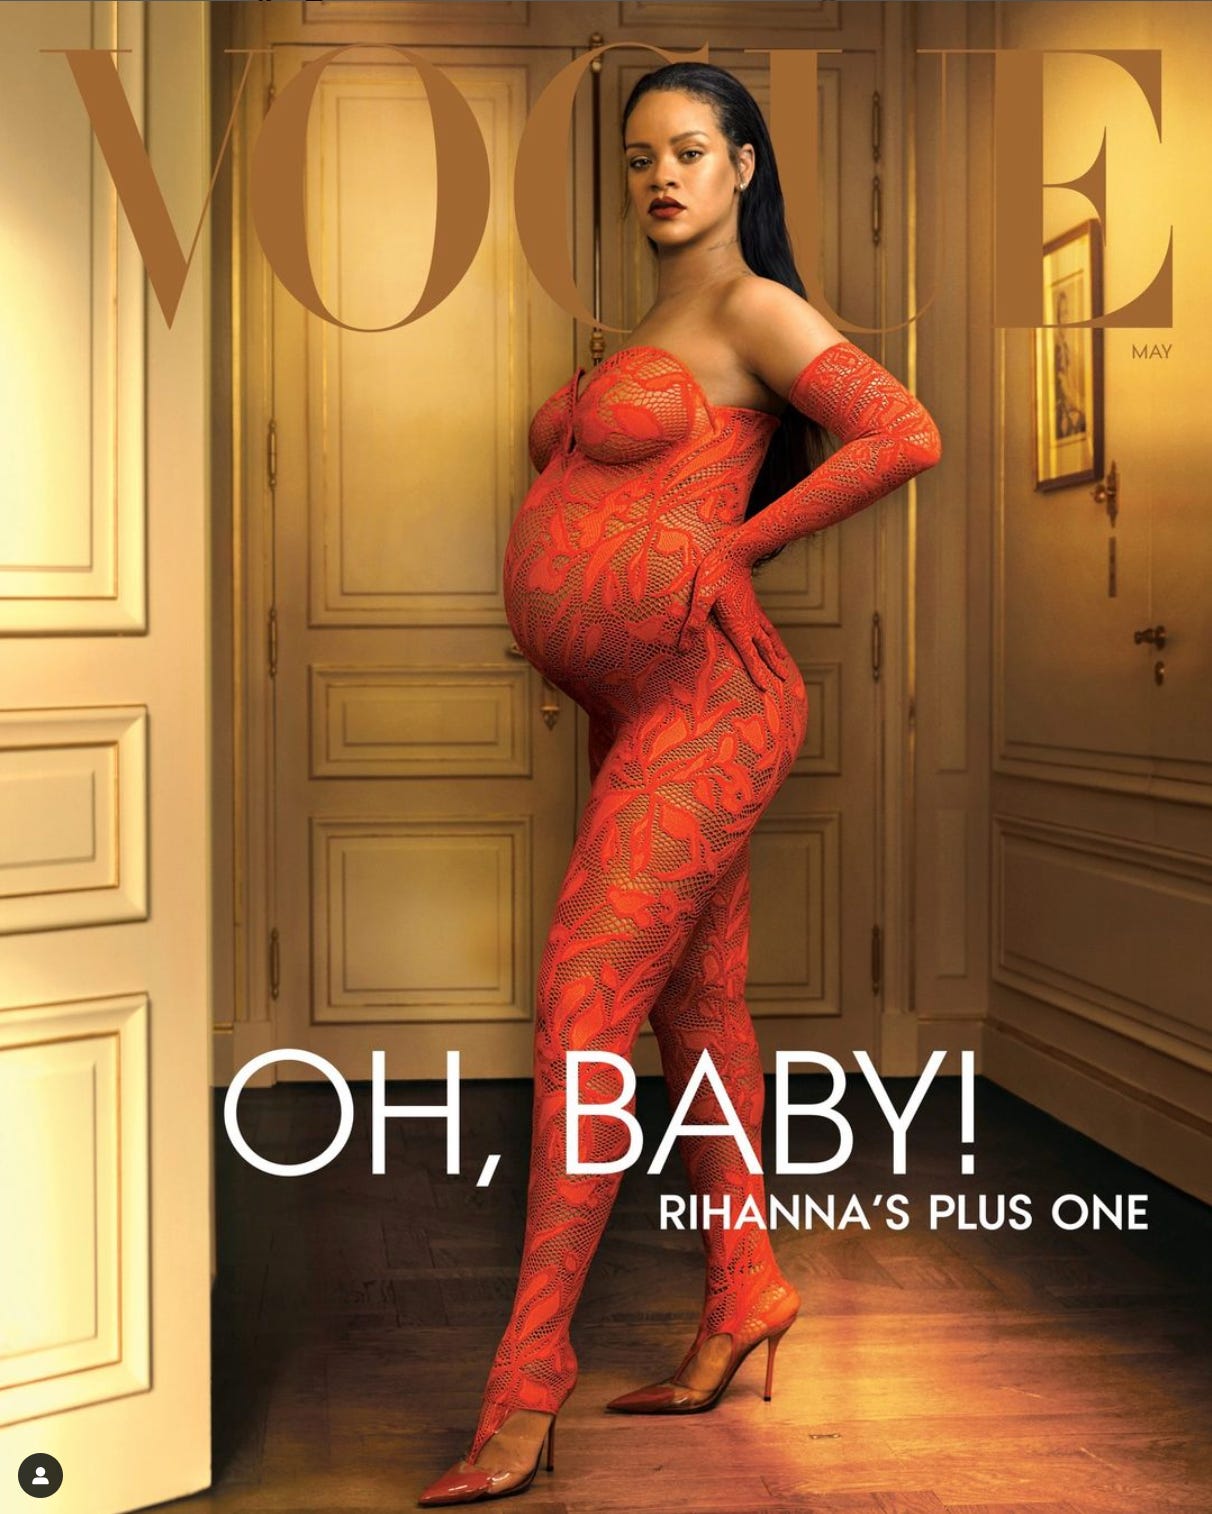 Rihanna on the cover of Vogue